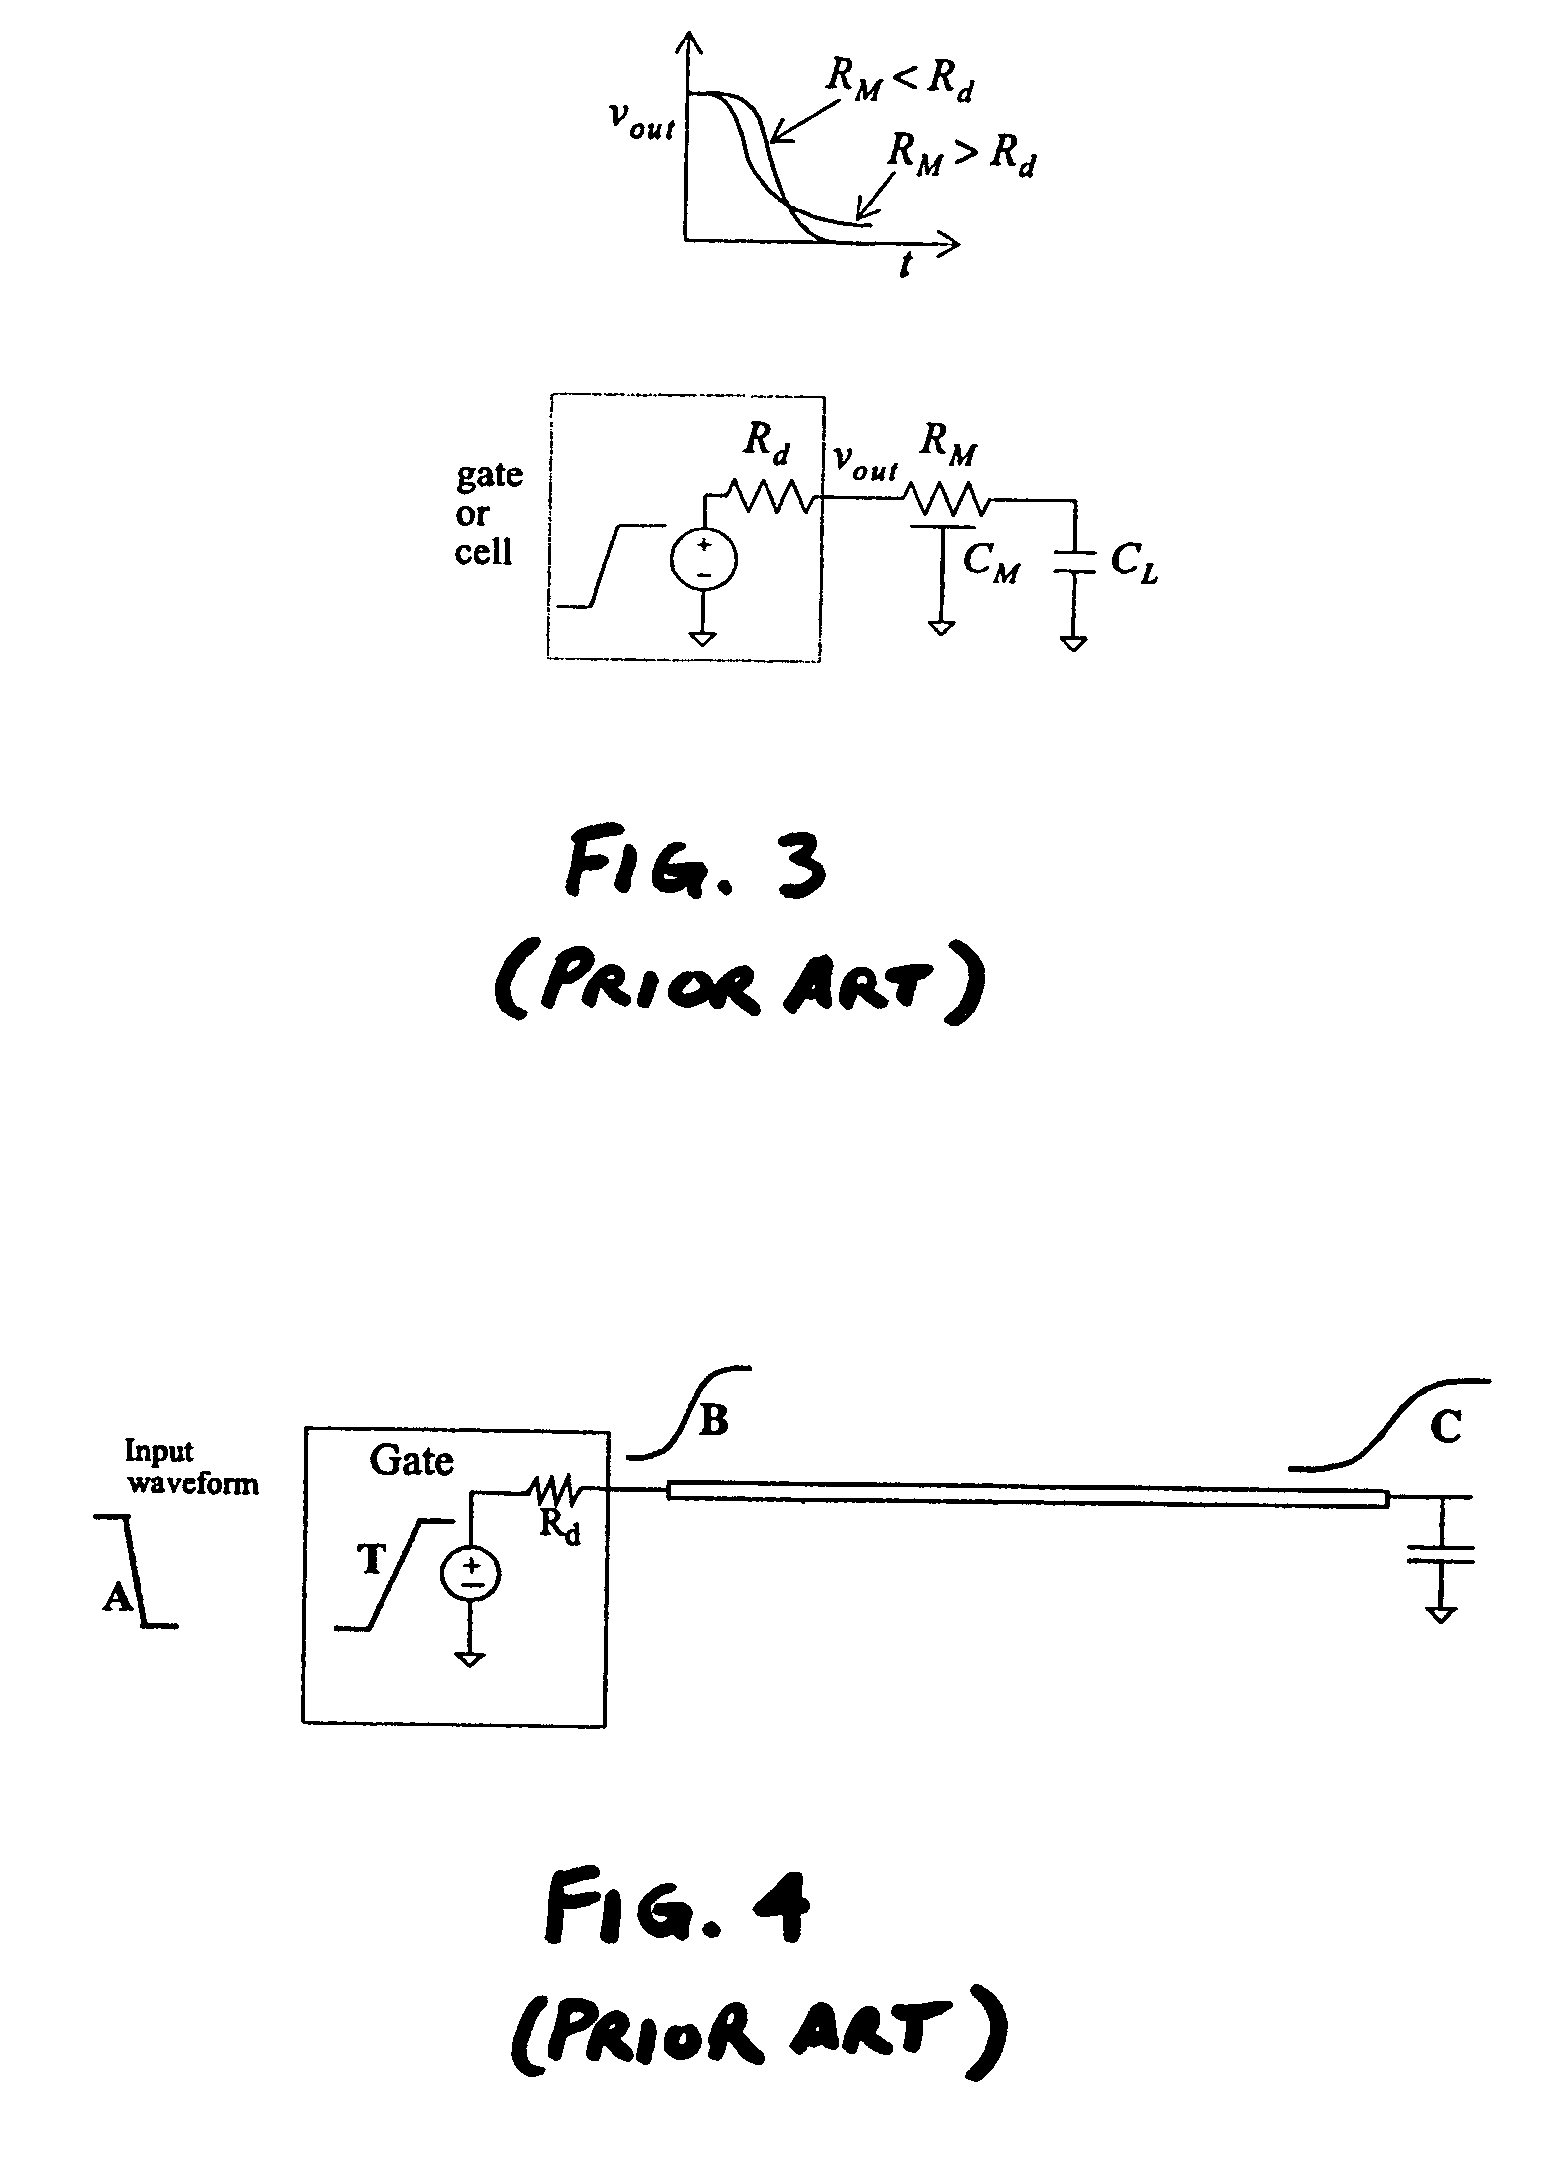 Modeling interconnected propagation delay for an integrated circuit design